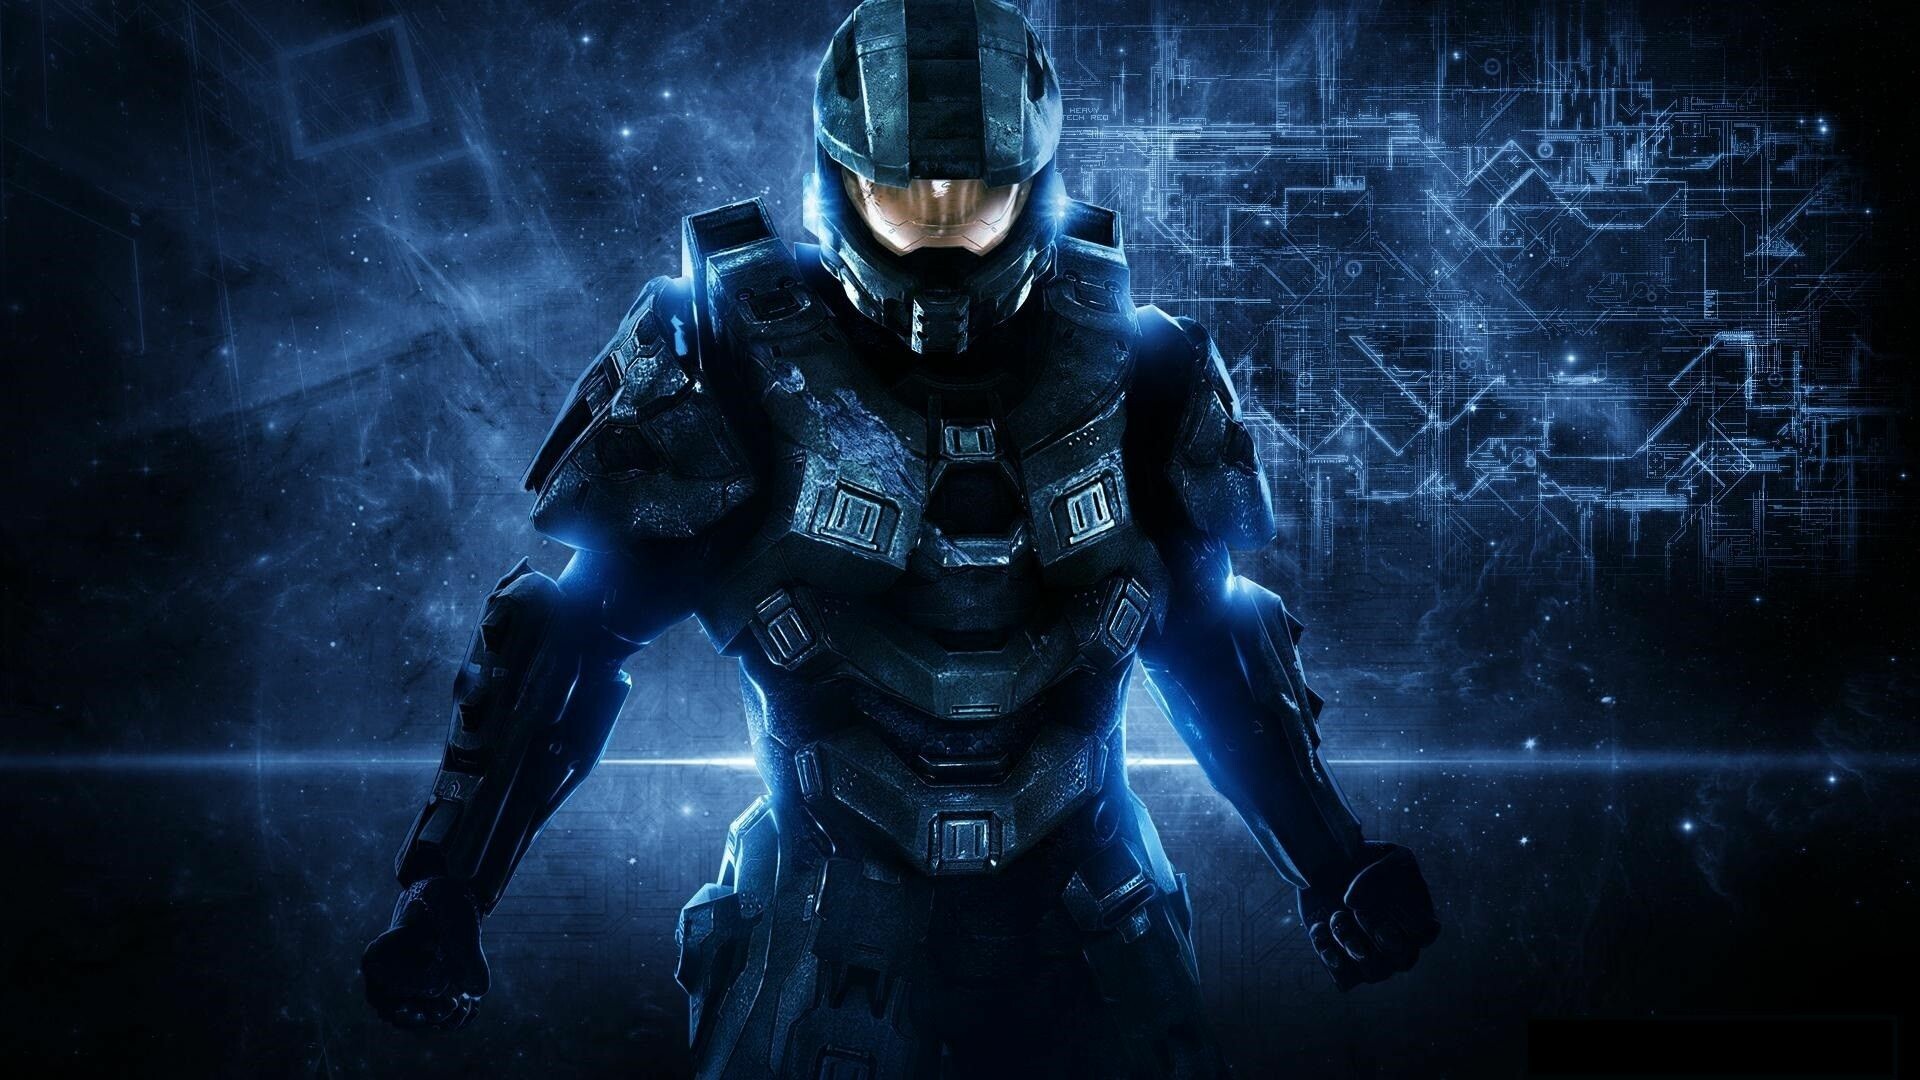 Halo: The Master Chief's backstory is revealed in the 2001 novel The Fall of Reach. 1920x1080 Full HD Background.